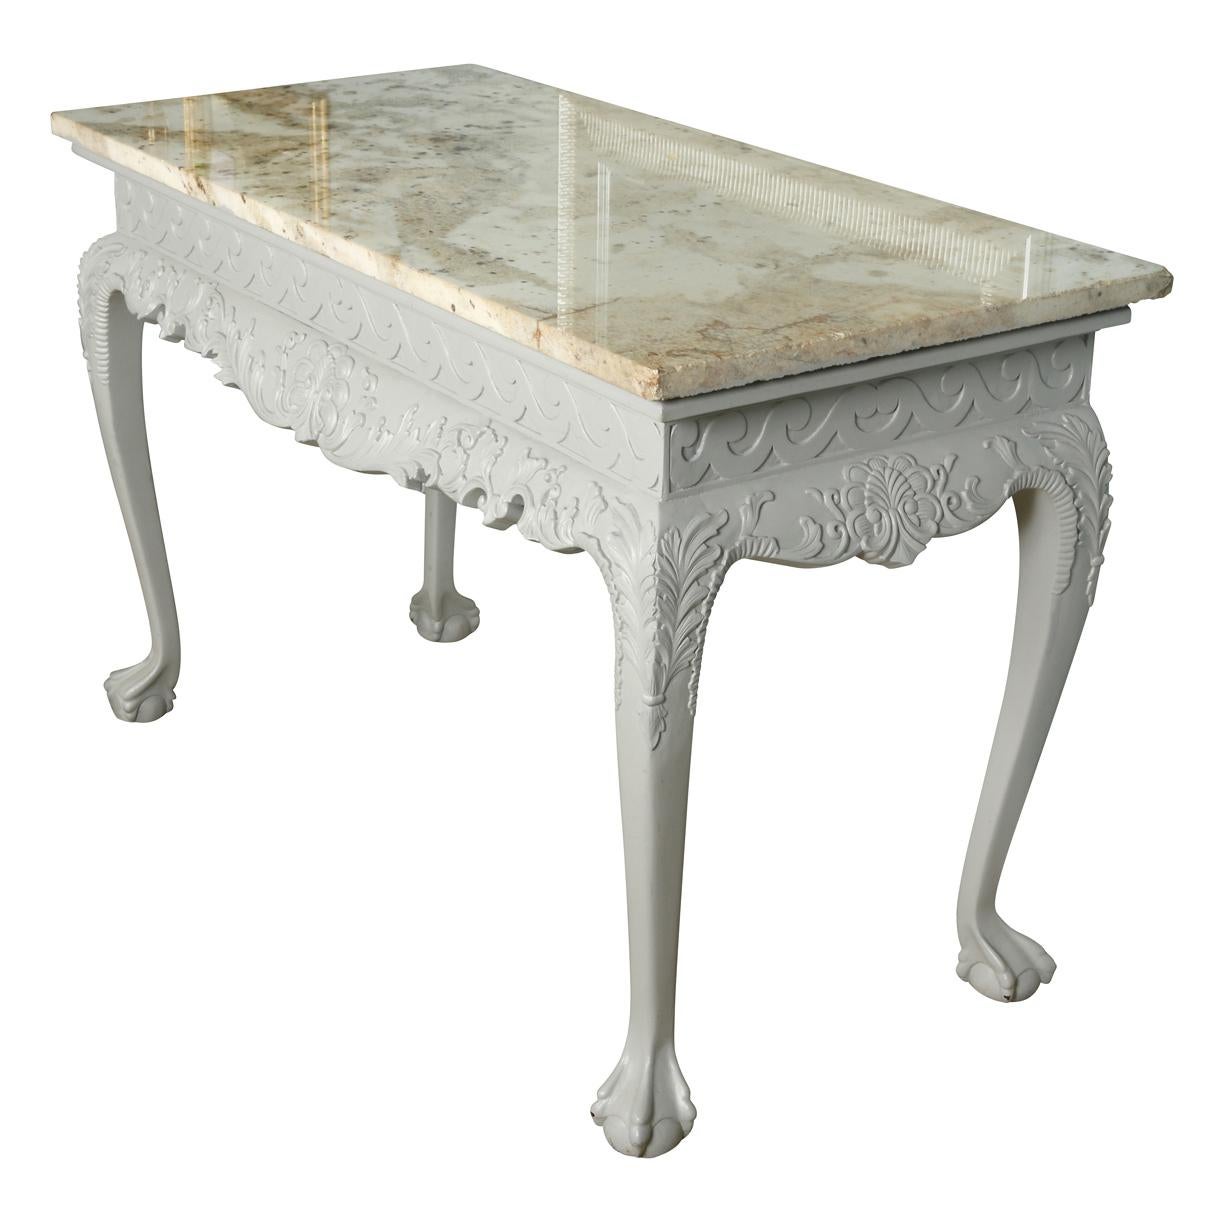 Gray painted ornate console table with claw and ball feet and a cream marble top.